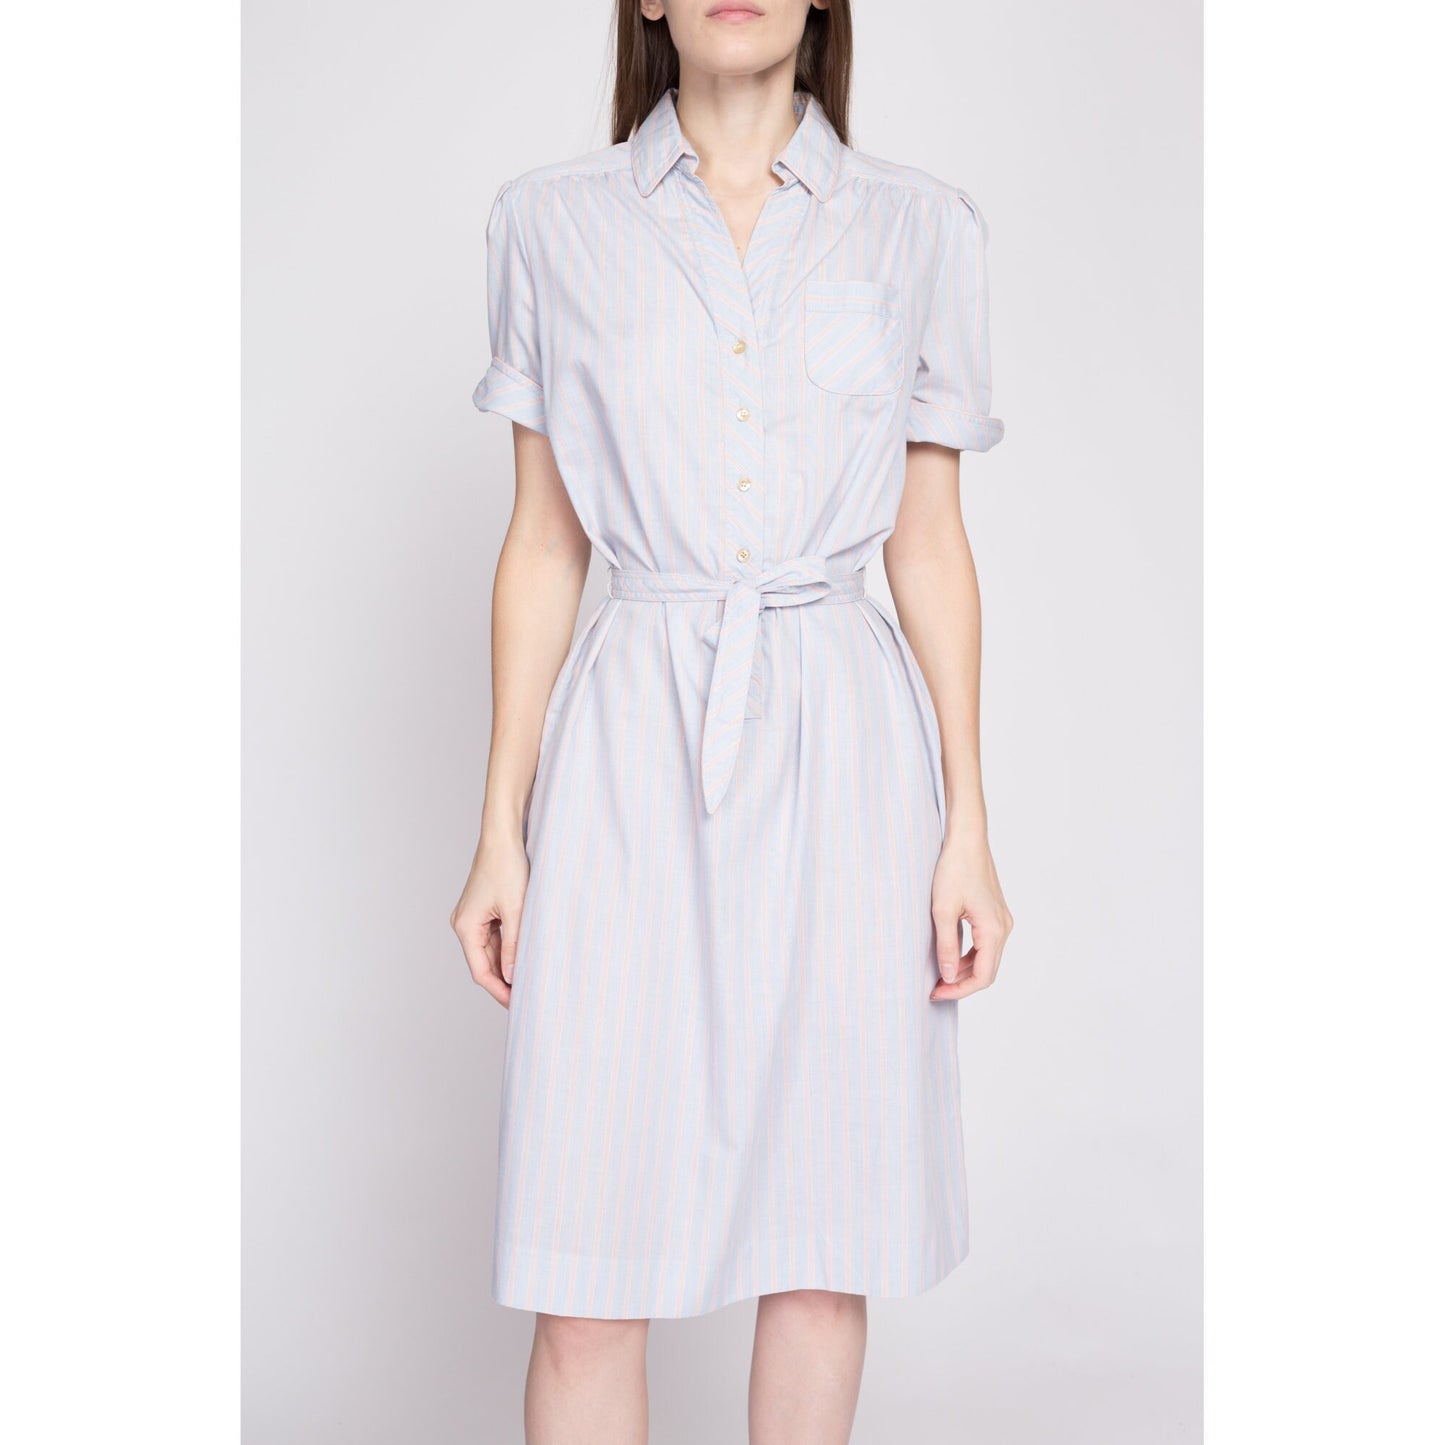 70s Blue Striped Belted Shirtdress - Medium to Large | Vintage Button Front Knee Length Short Sleeve Midi Day Dress